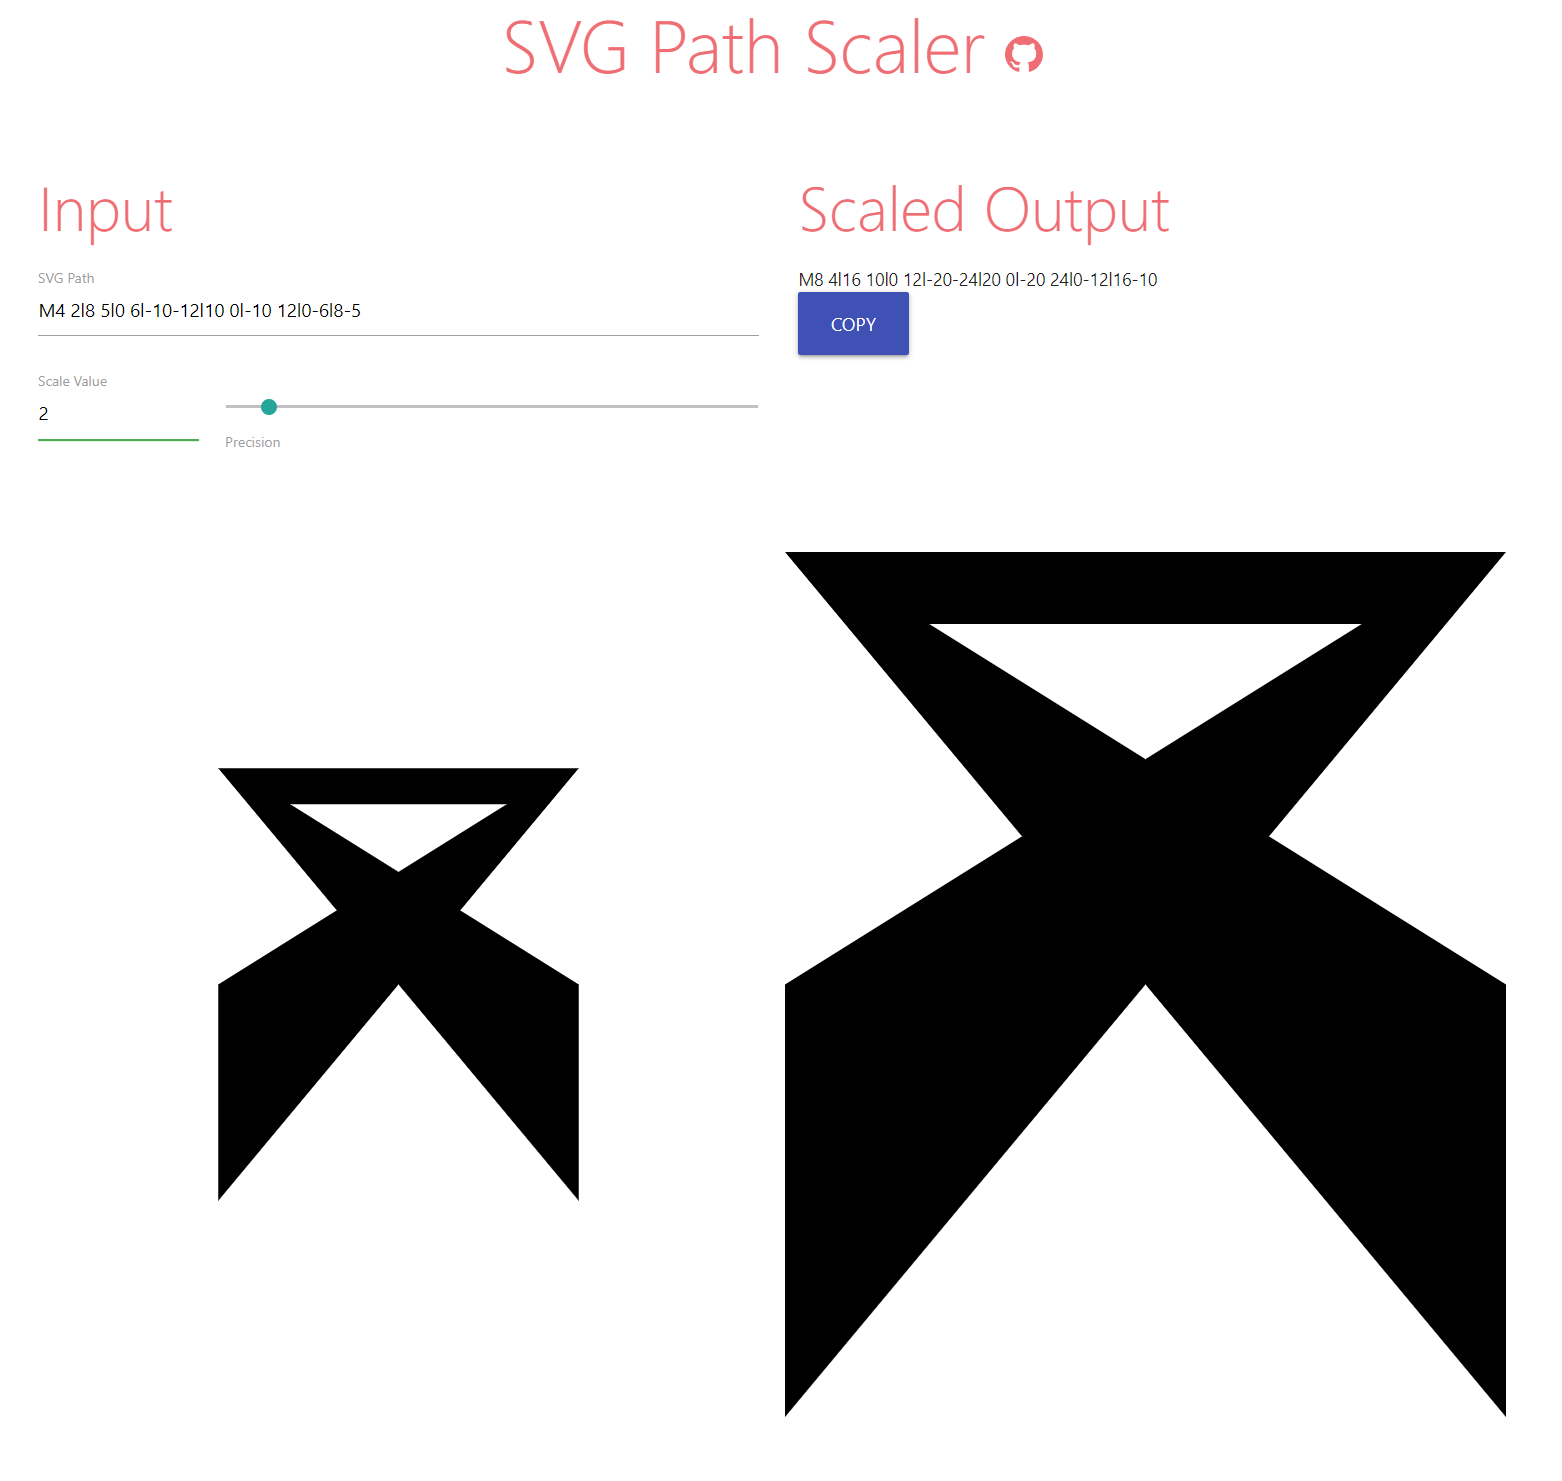 SVG Scale